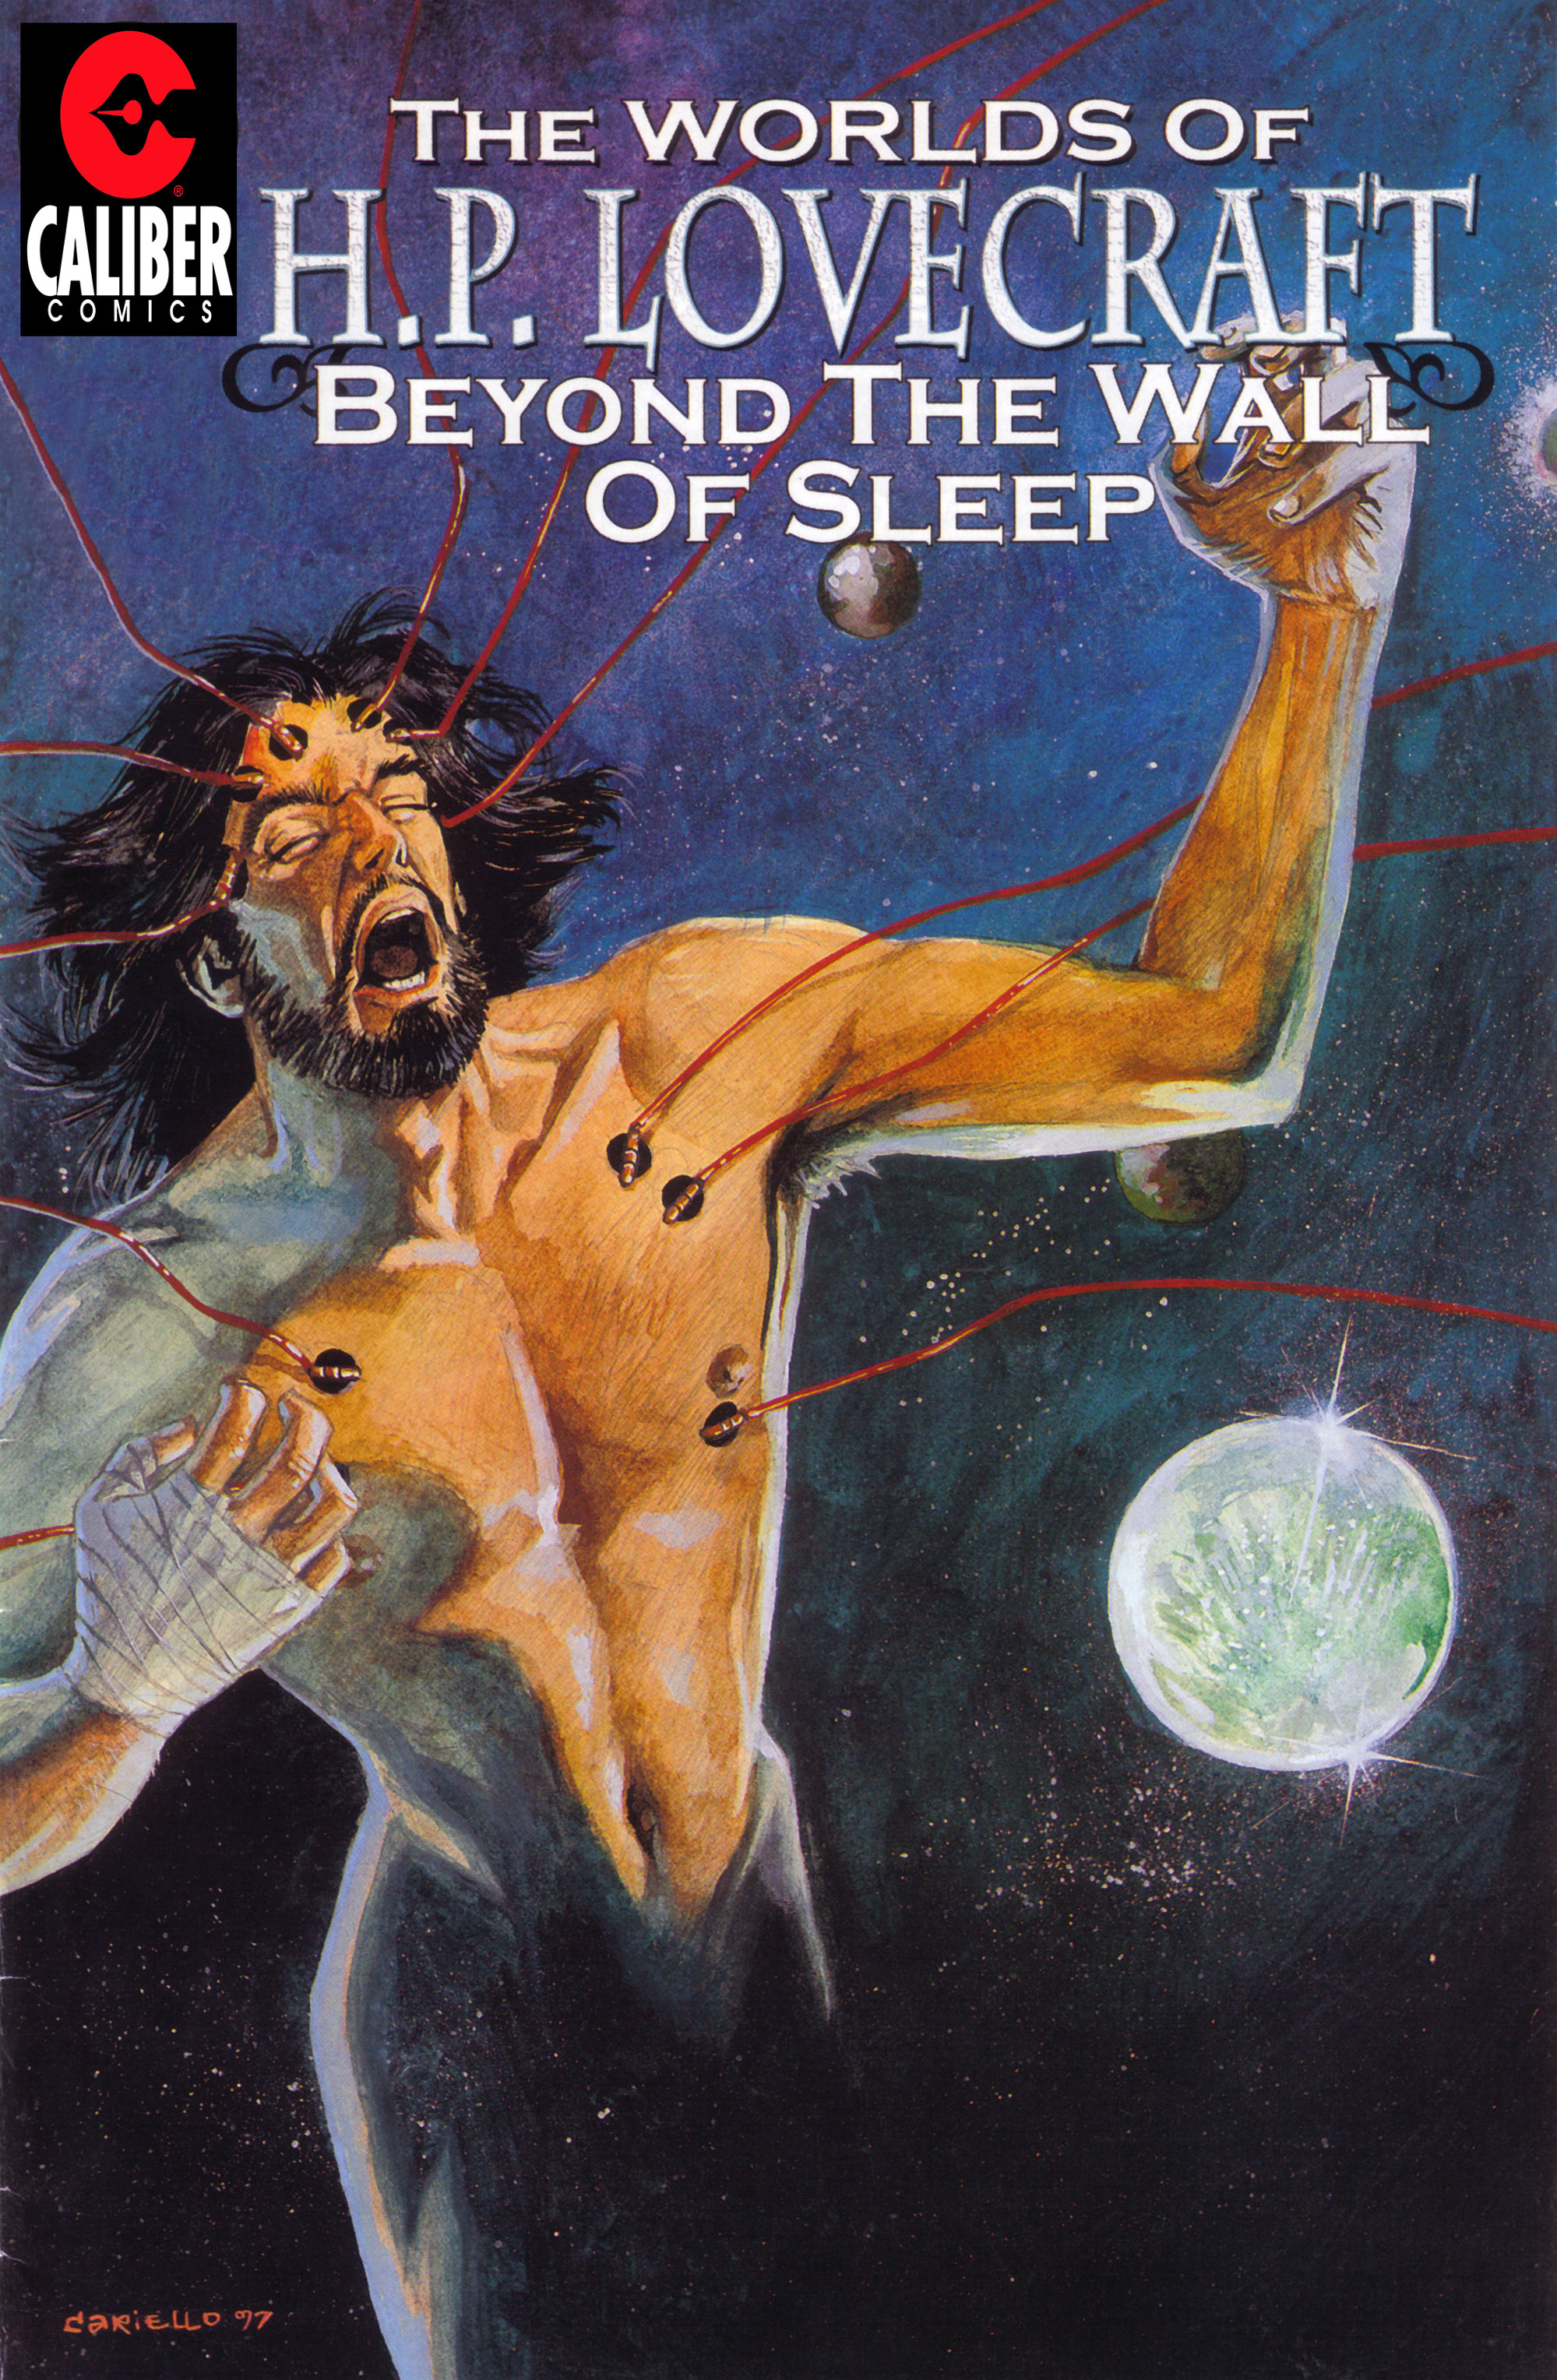 Read online Worlds of H.P. Lovecraft comic -  Issue # Issue Beyond the Wall of Sleep - 1